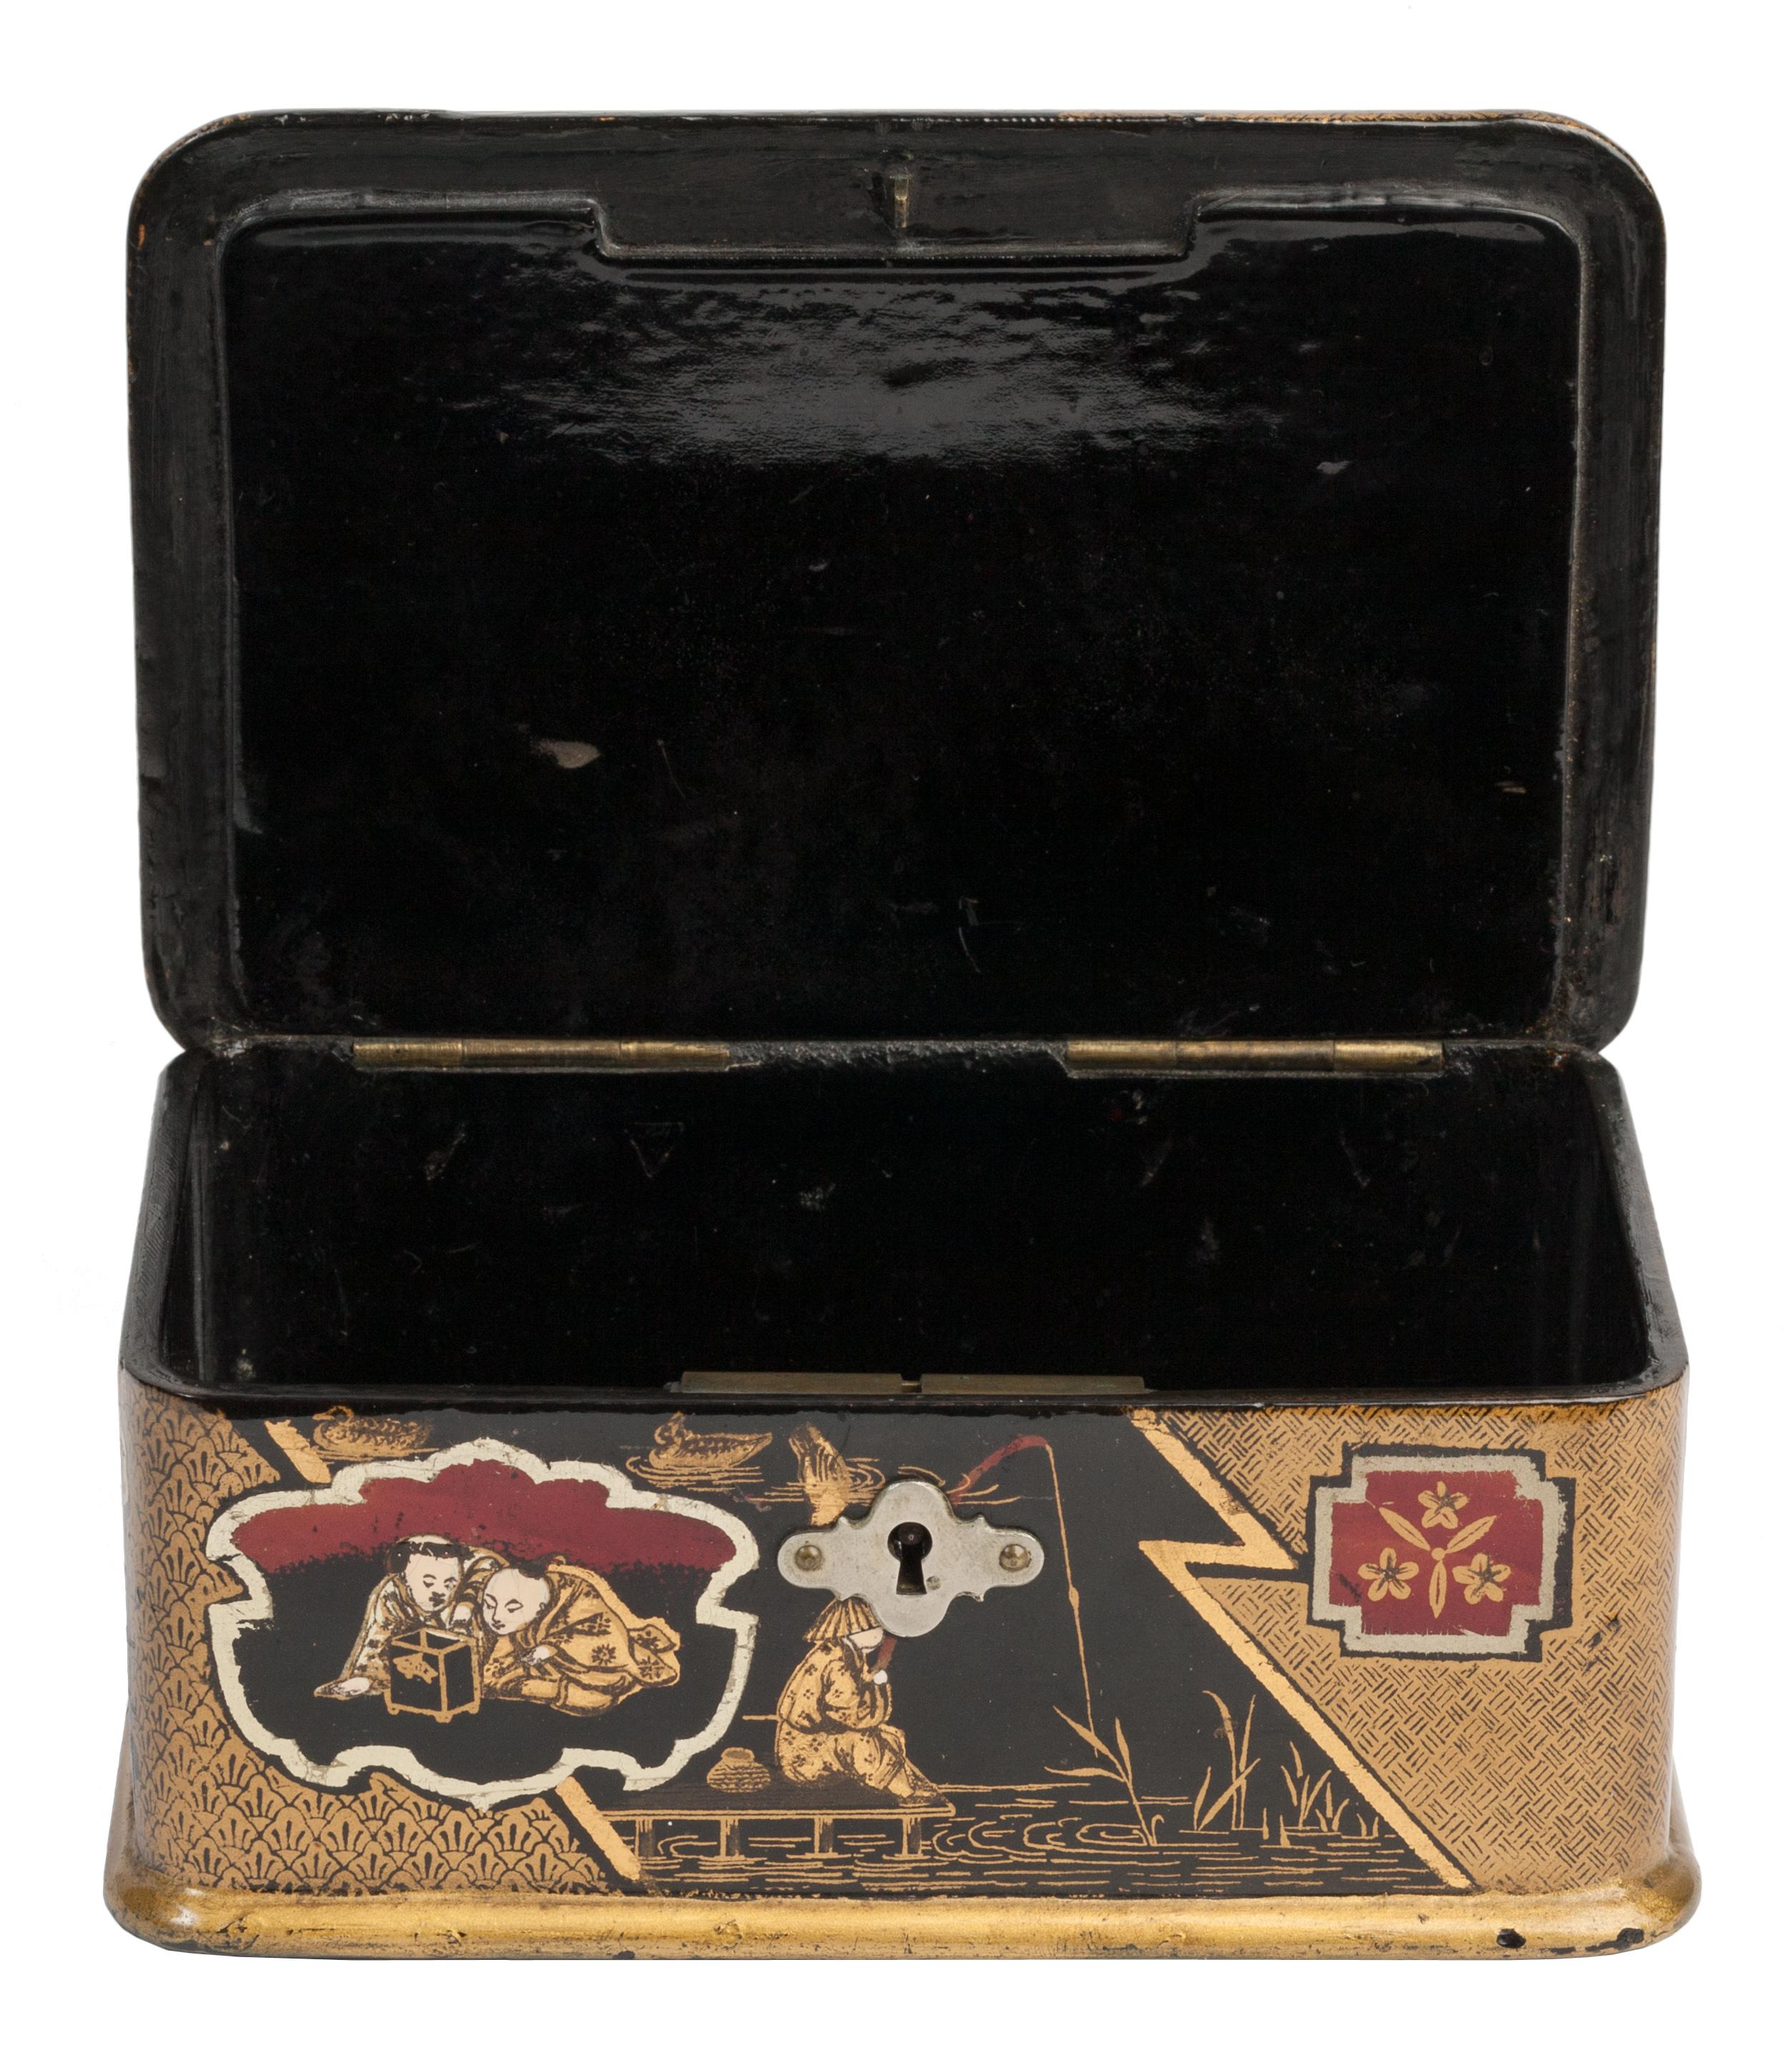 A nice early 20th century black lacquer papier mâché tea caddy / hinged box. Very nice condition.

 